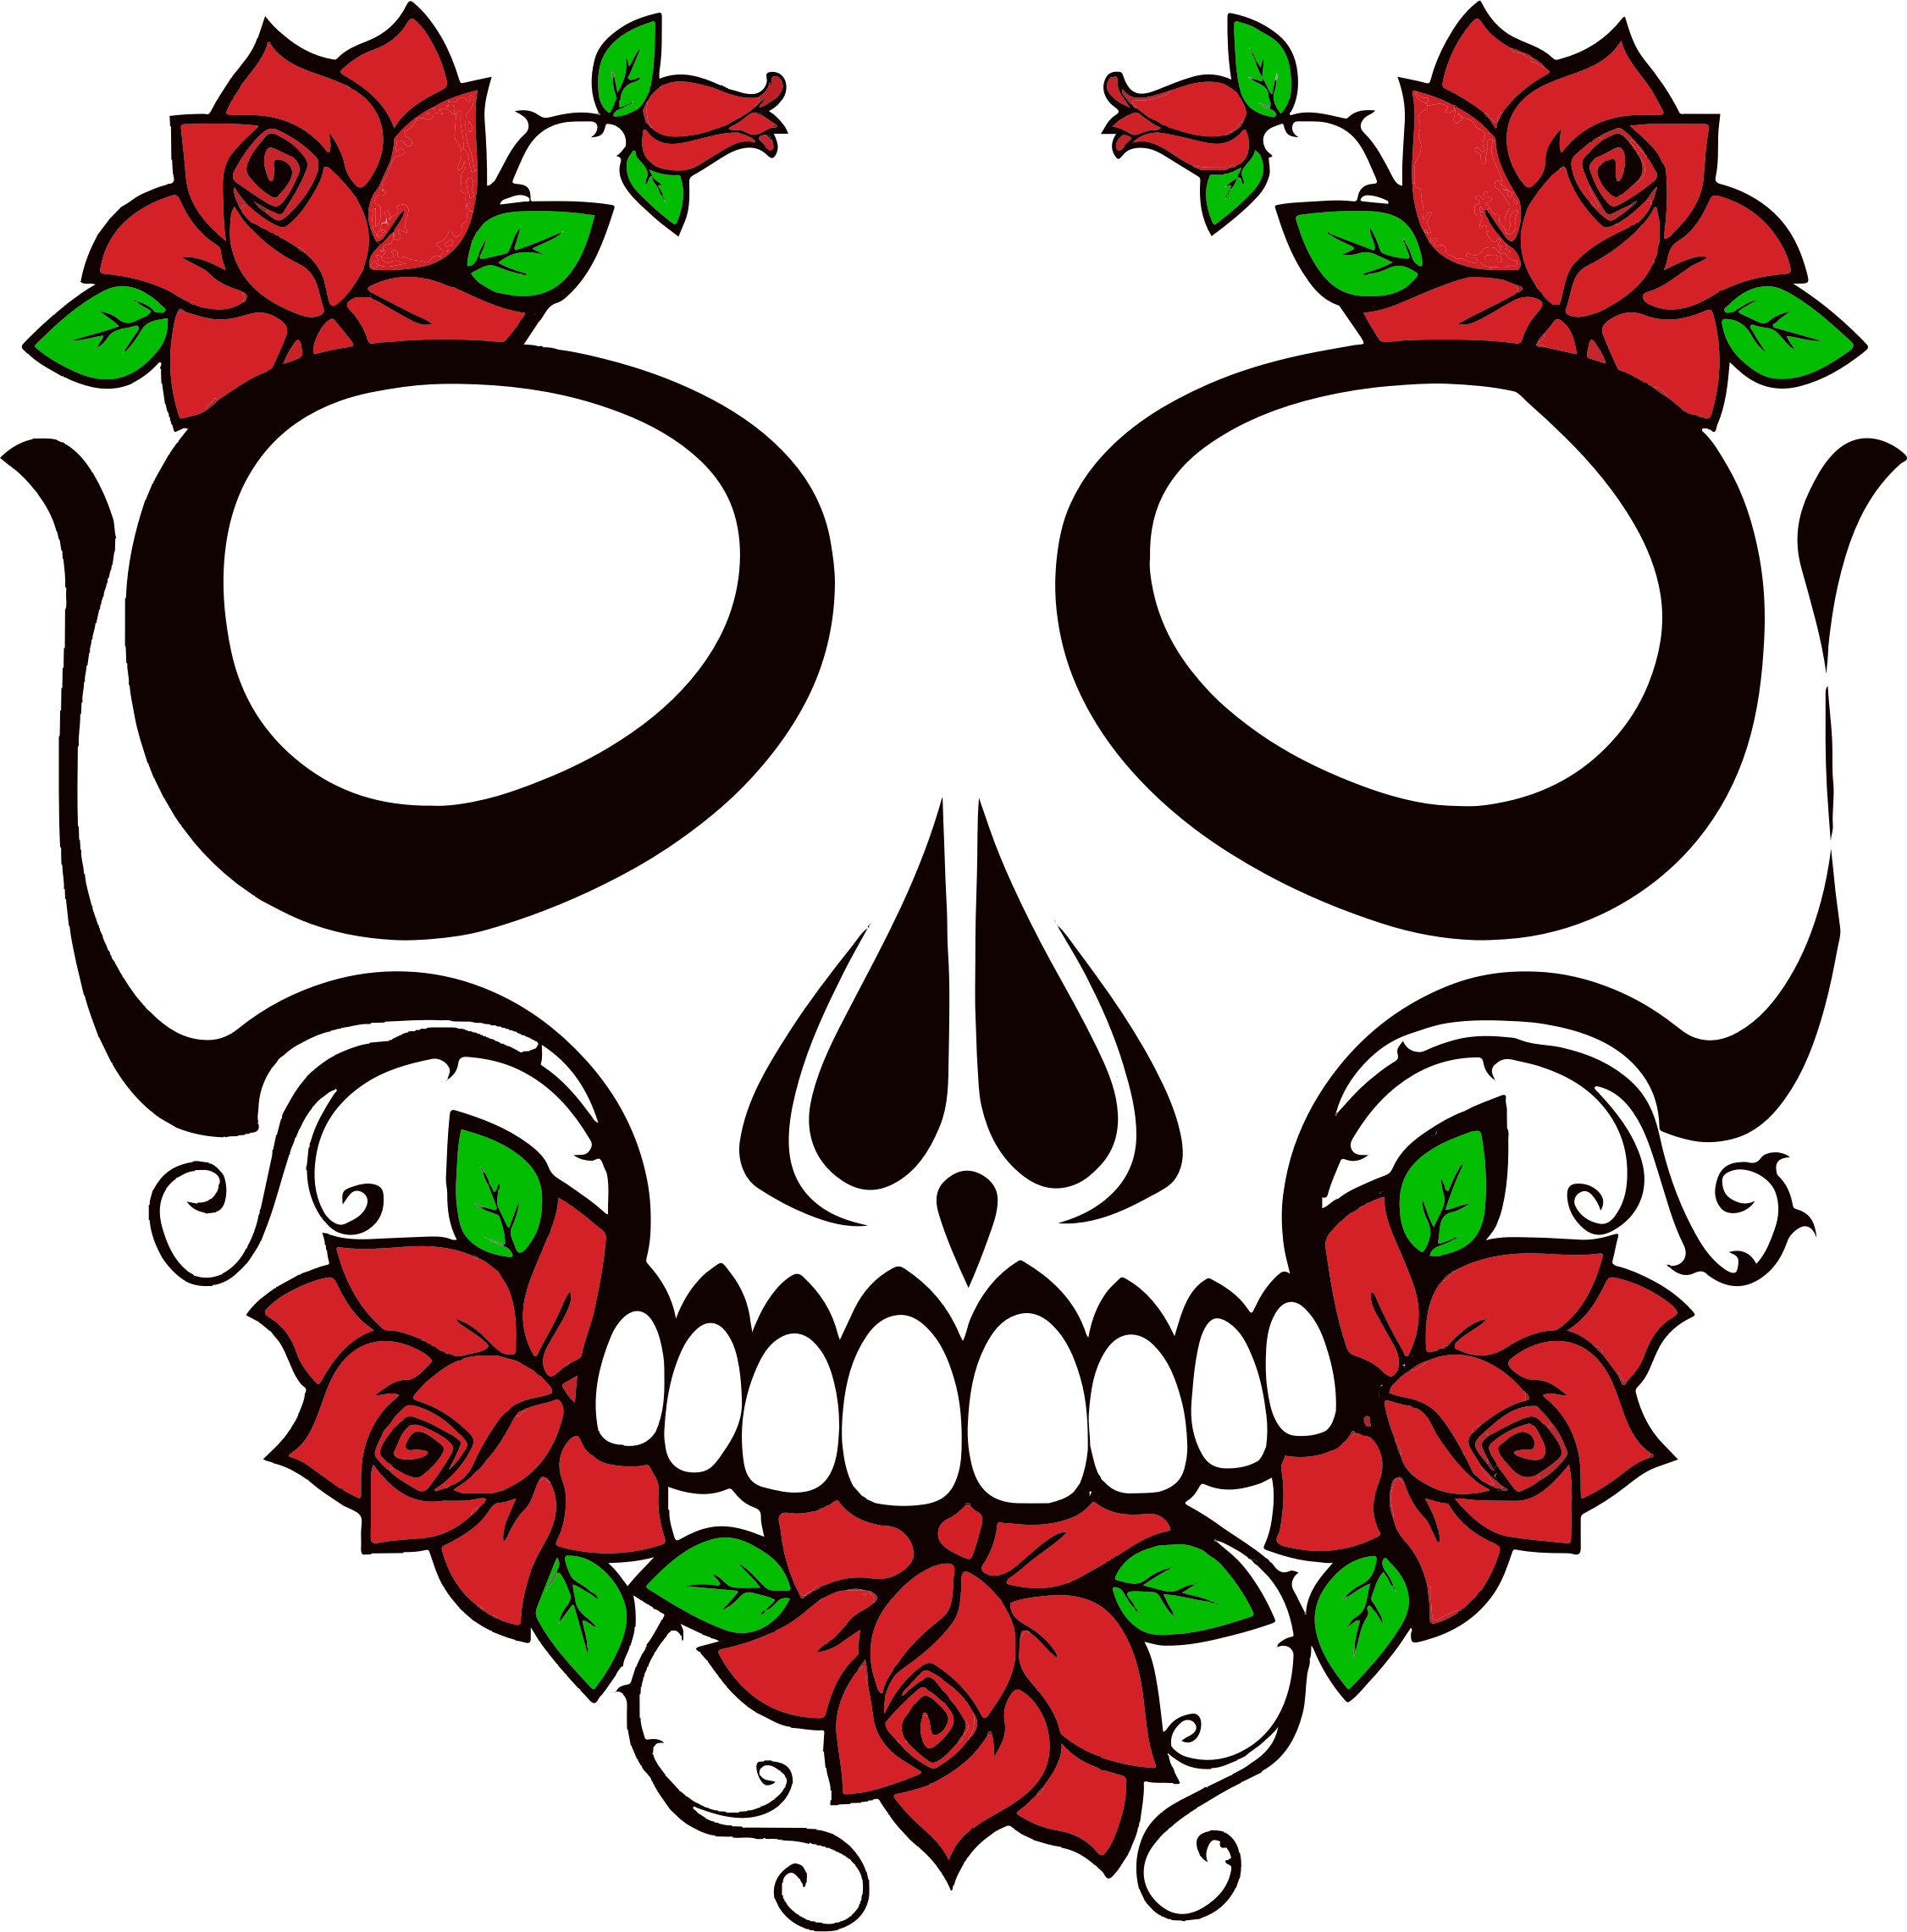 Skull And Roses Clipart - Clipart Suggest - Black and White Skull with Rose